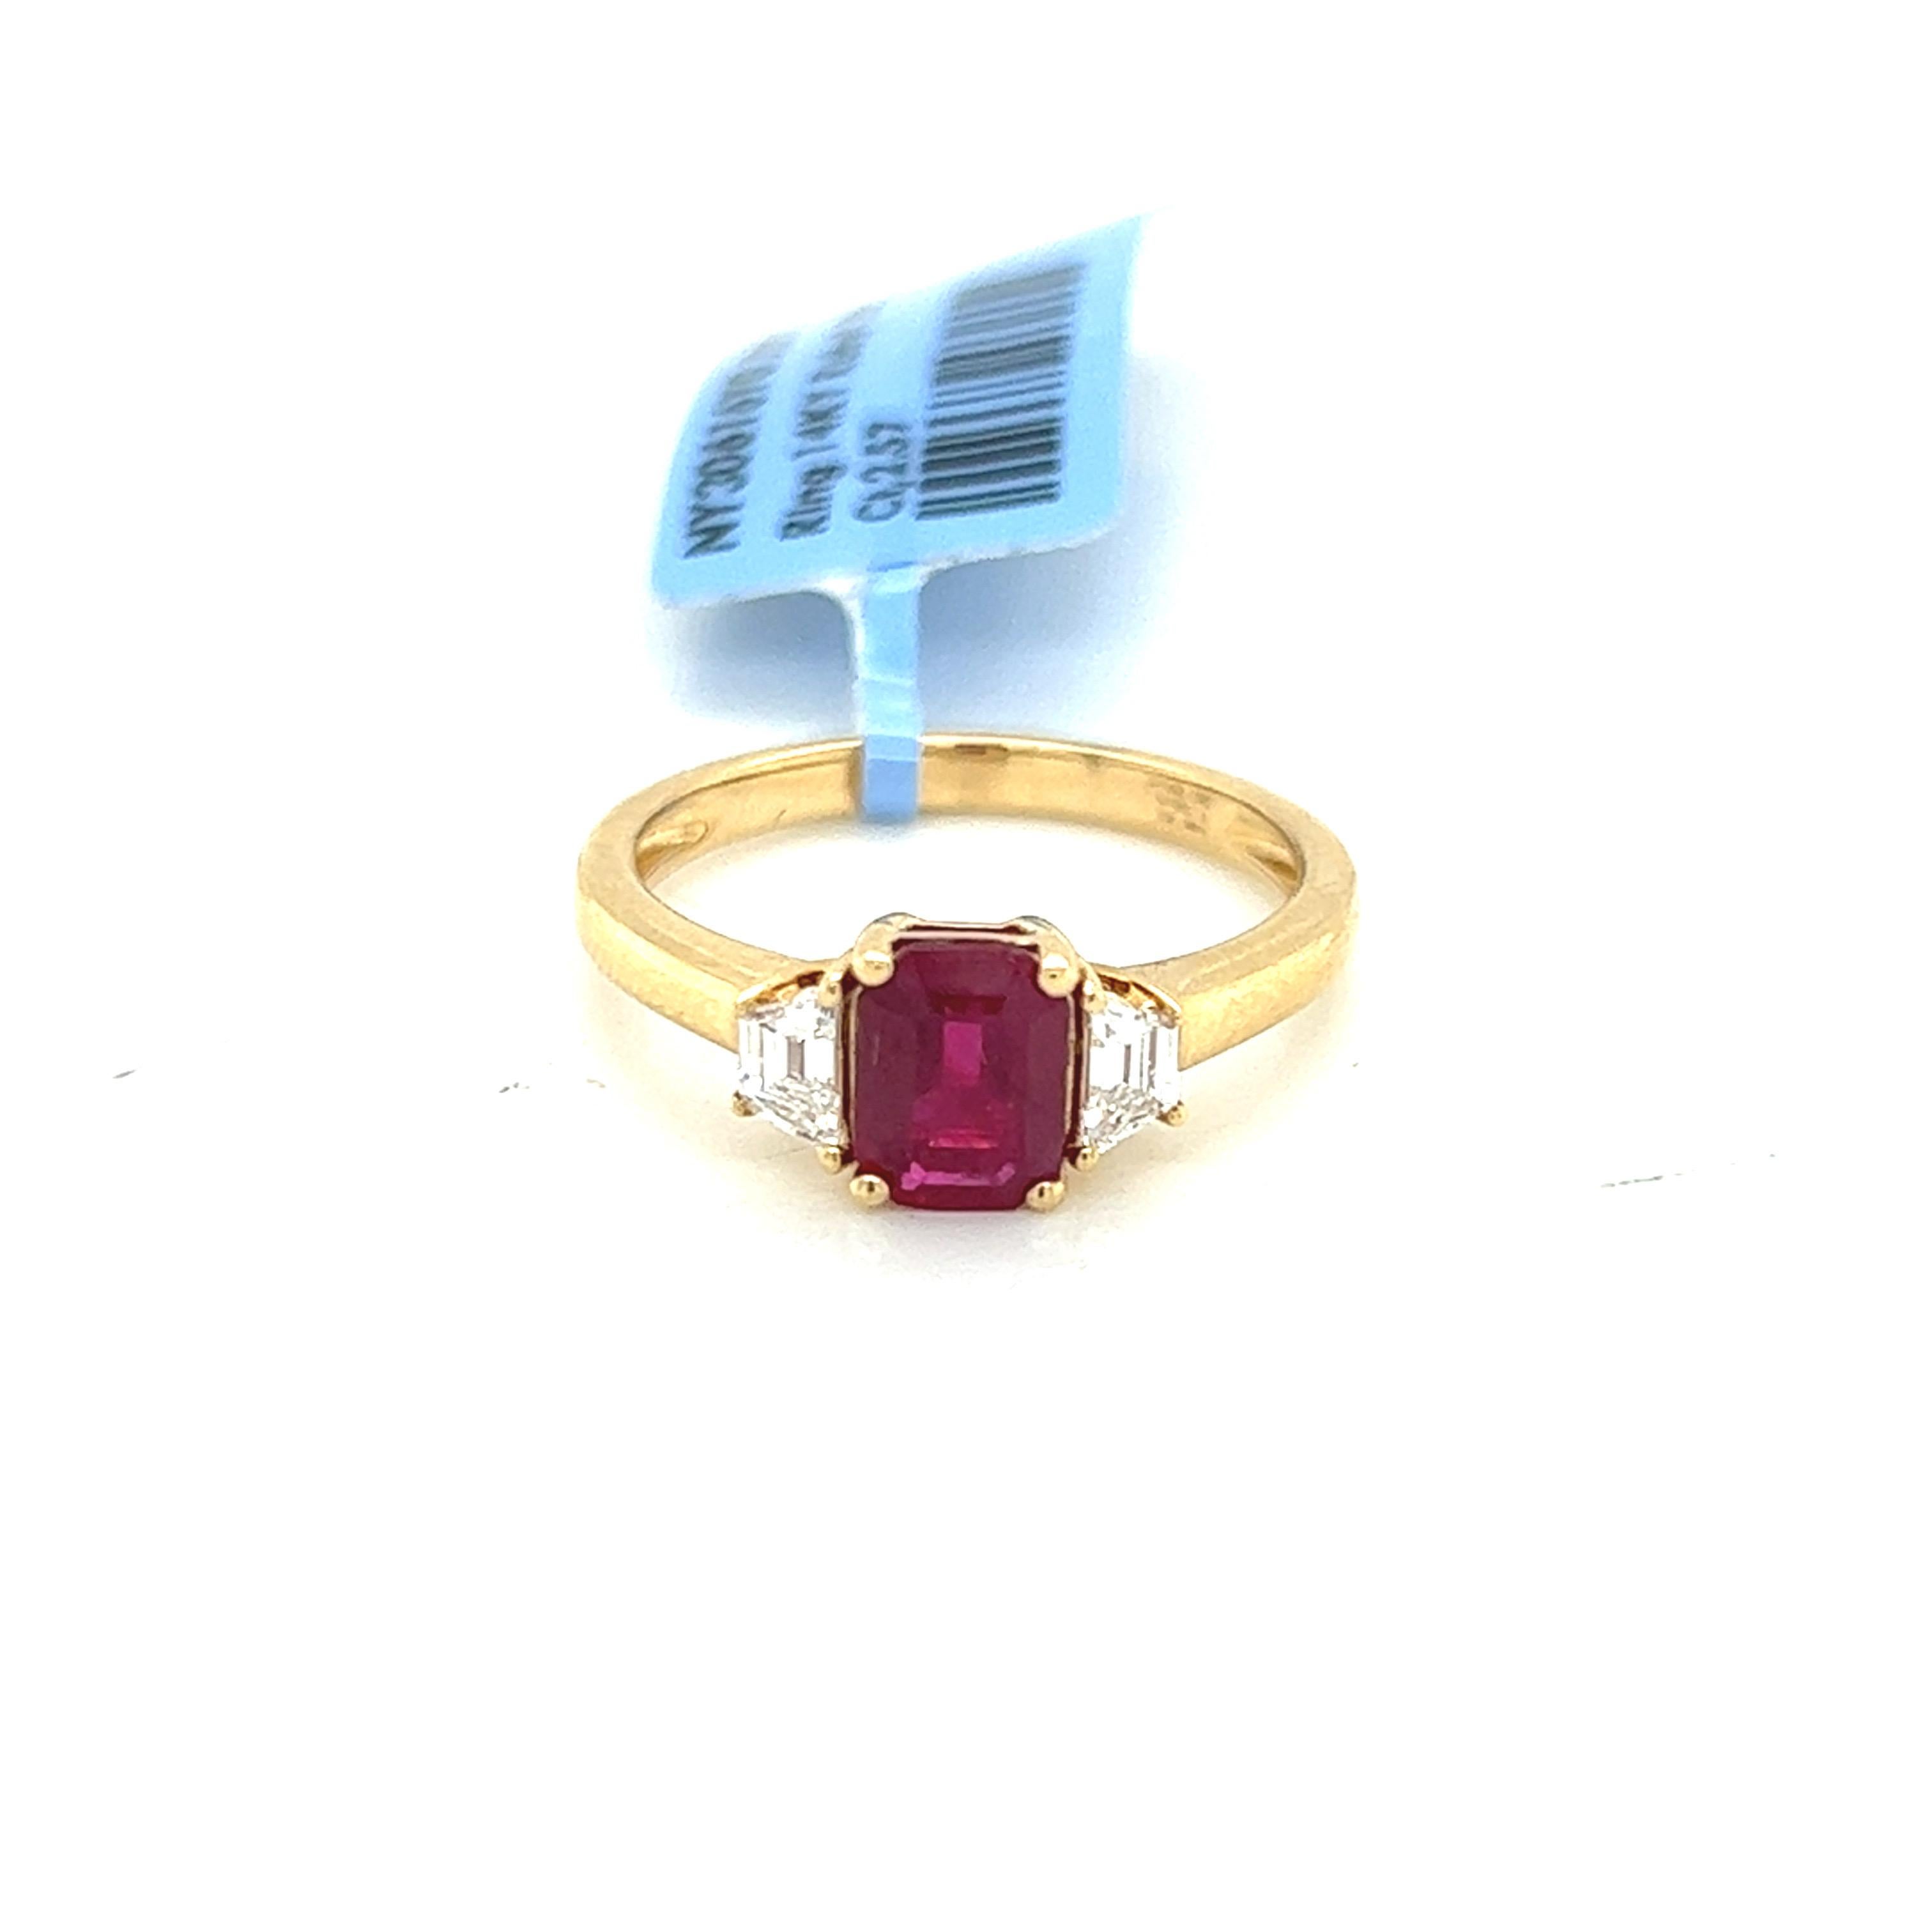 Introducing our exquisite 1.38 Carat Ruby and Diamond Three Stone Ring, a captivating piece of jewelry that radiates elegance and sophistication. The centerpiece of this stunning ring is a natural 1.38 carat emerald-cut ruby, of exceptional quality